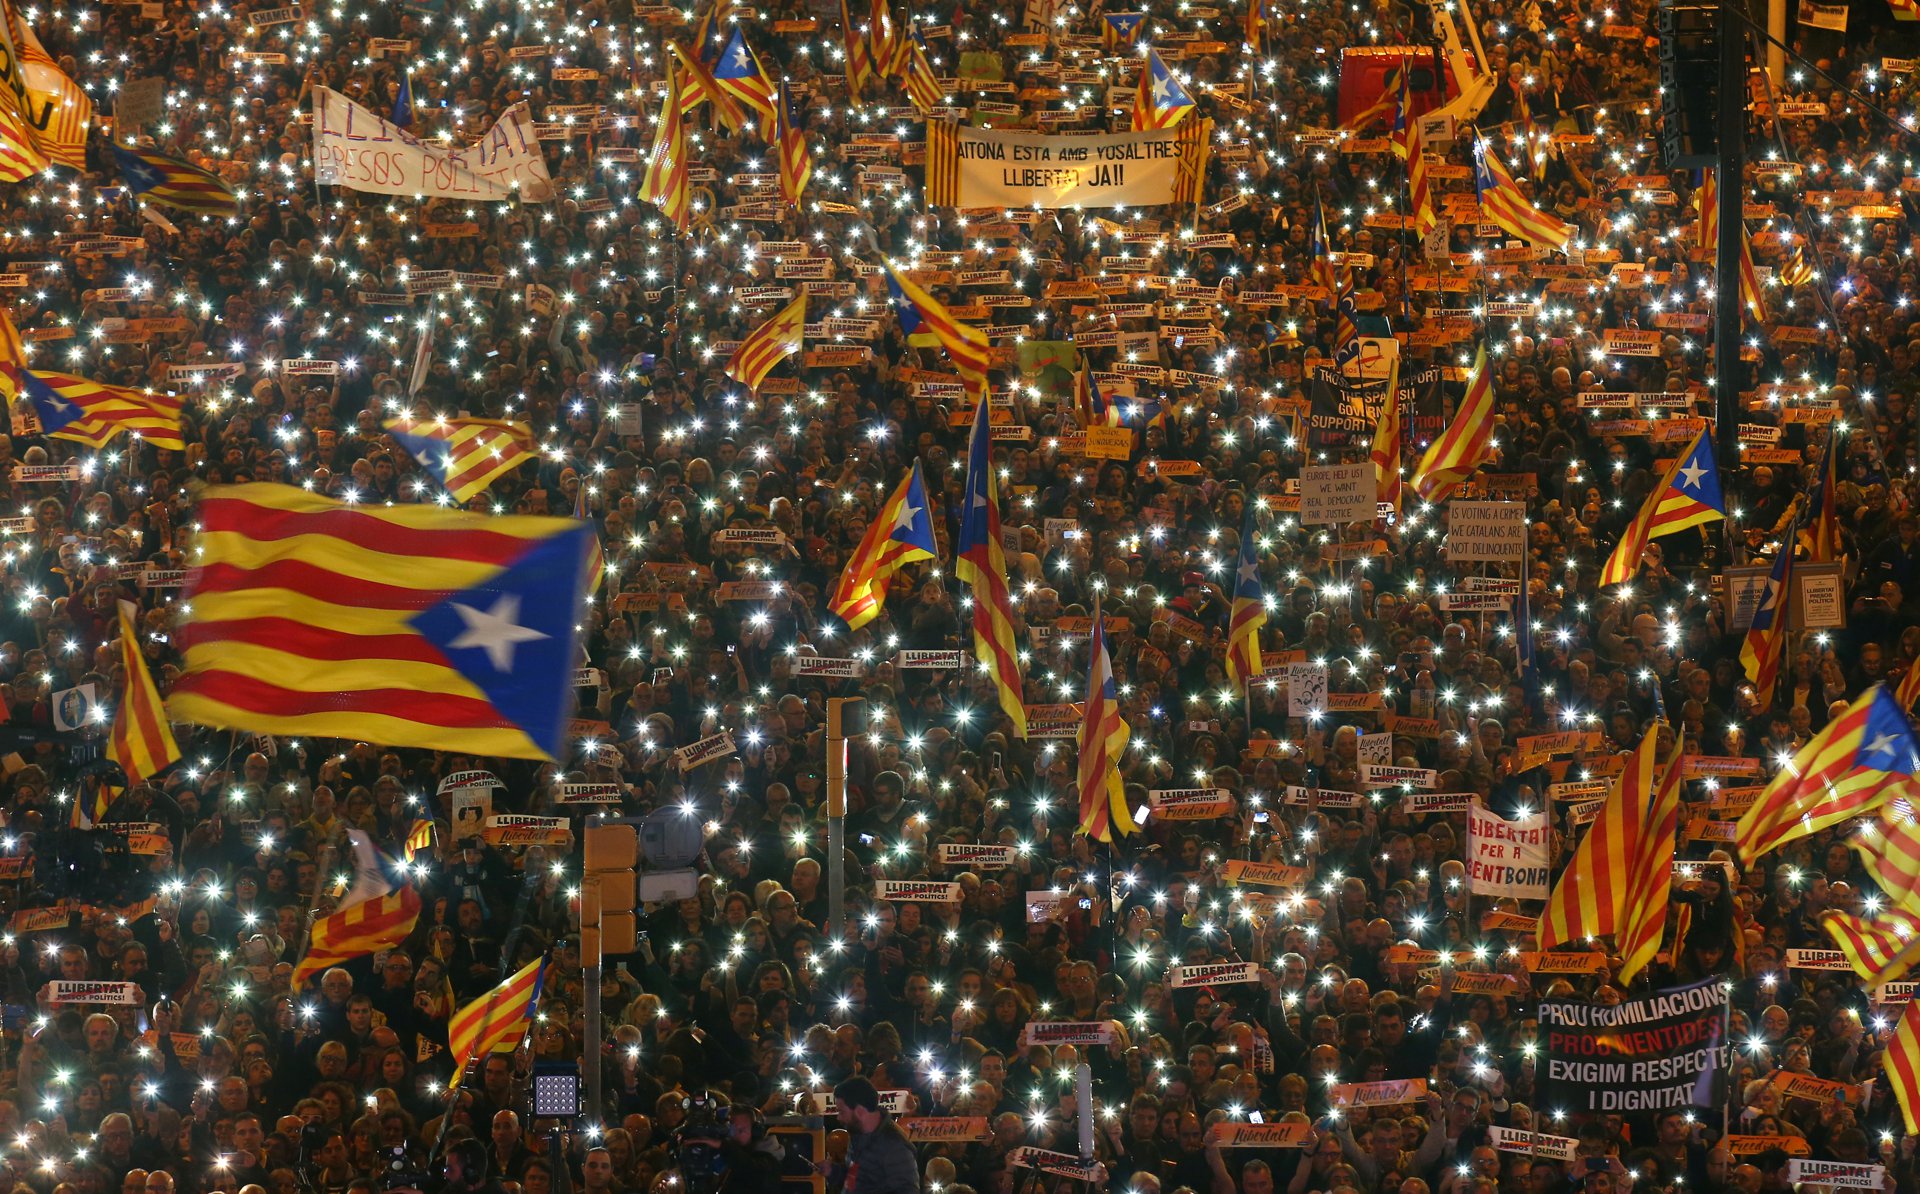 Protesters Hold The Lights Of Their Mobile Phones As They Wave Estelada Flags During A Demonstration Called By Pro Independence Associations Asking For The Release Of Jailed Catalan Activists And Leaders, In Barcelona